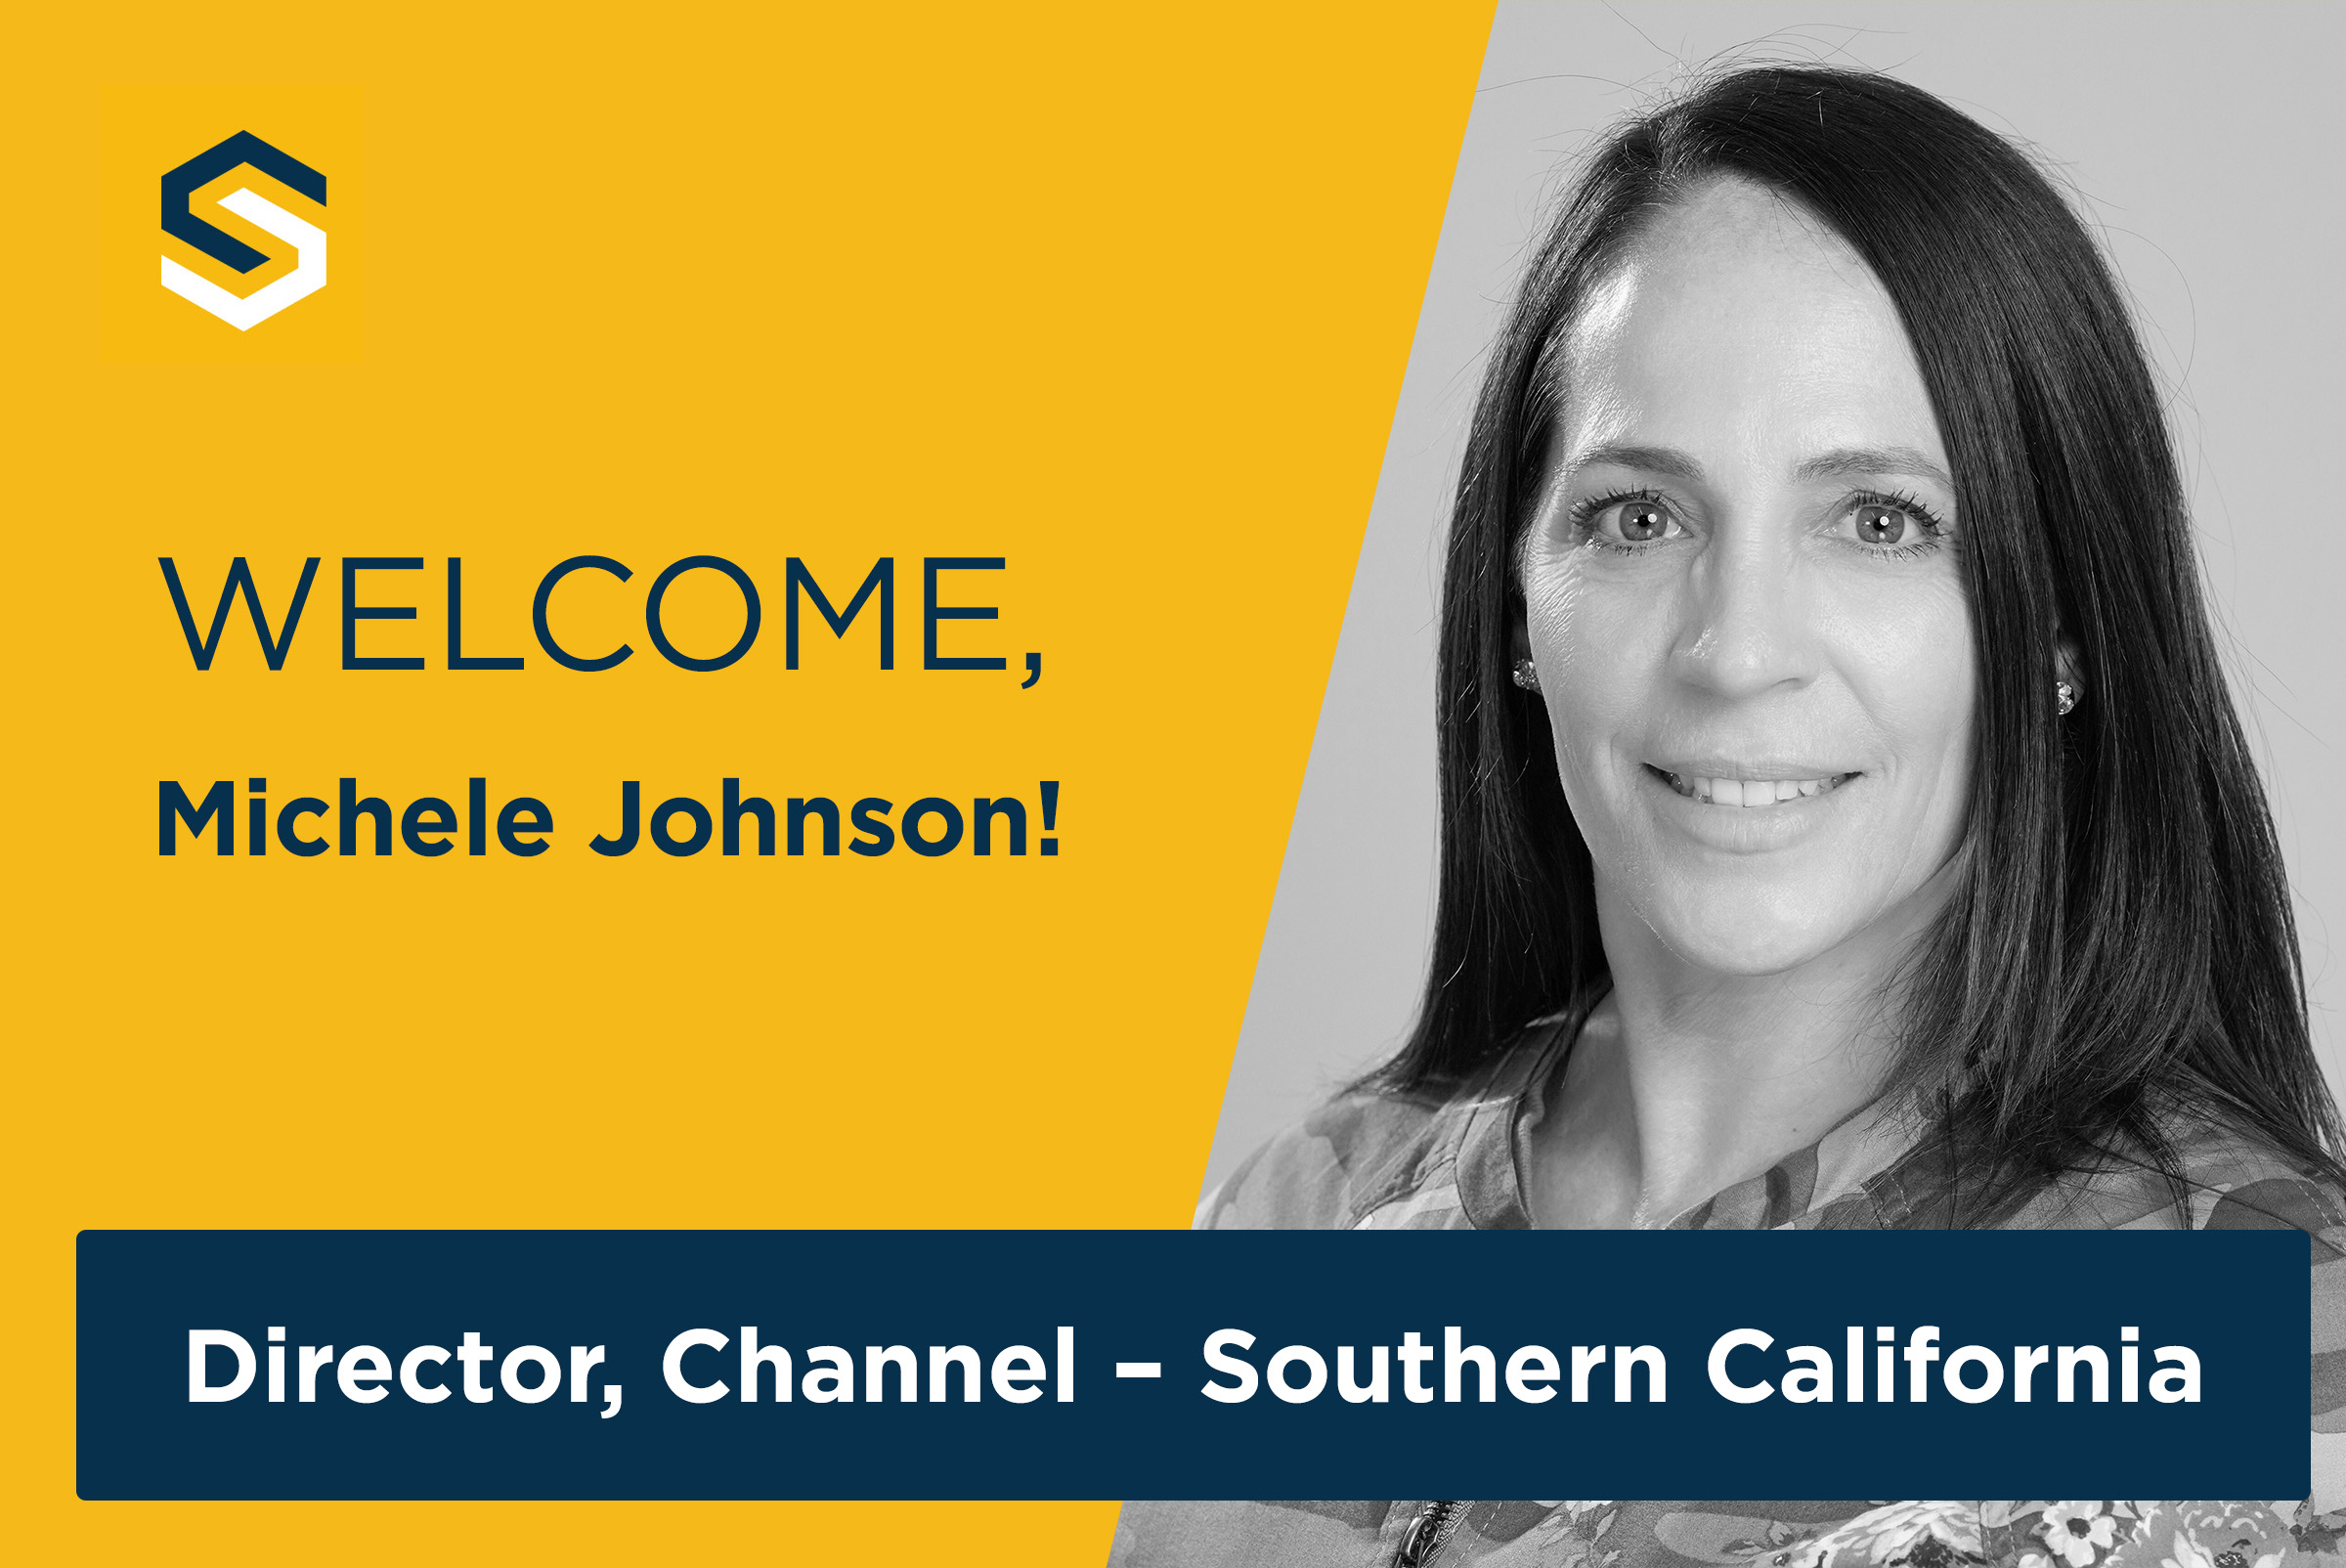 Sandler Partners Welcomes Michele Johnson as Director, Channel - Southern California